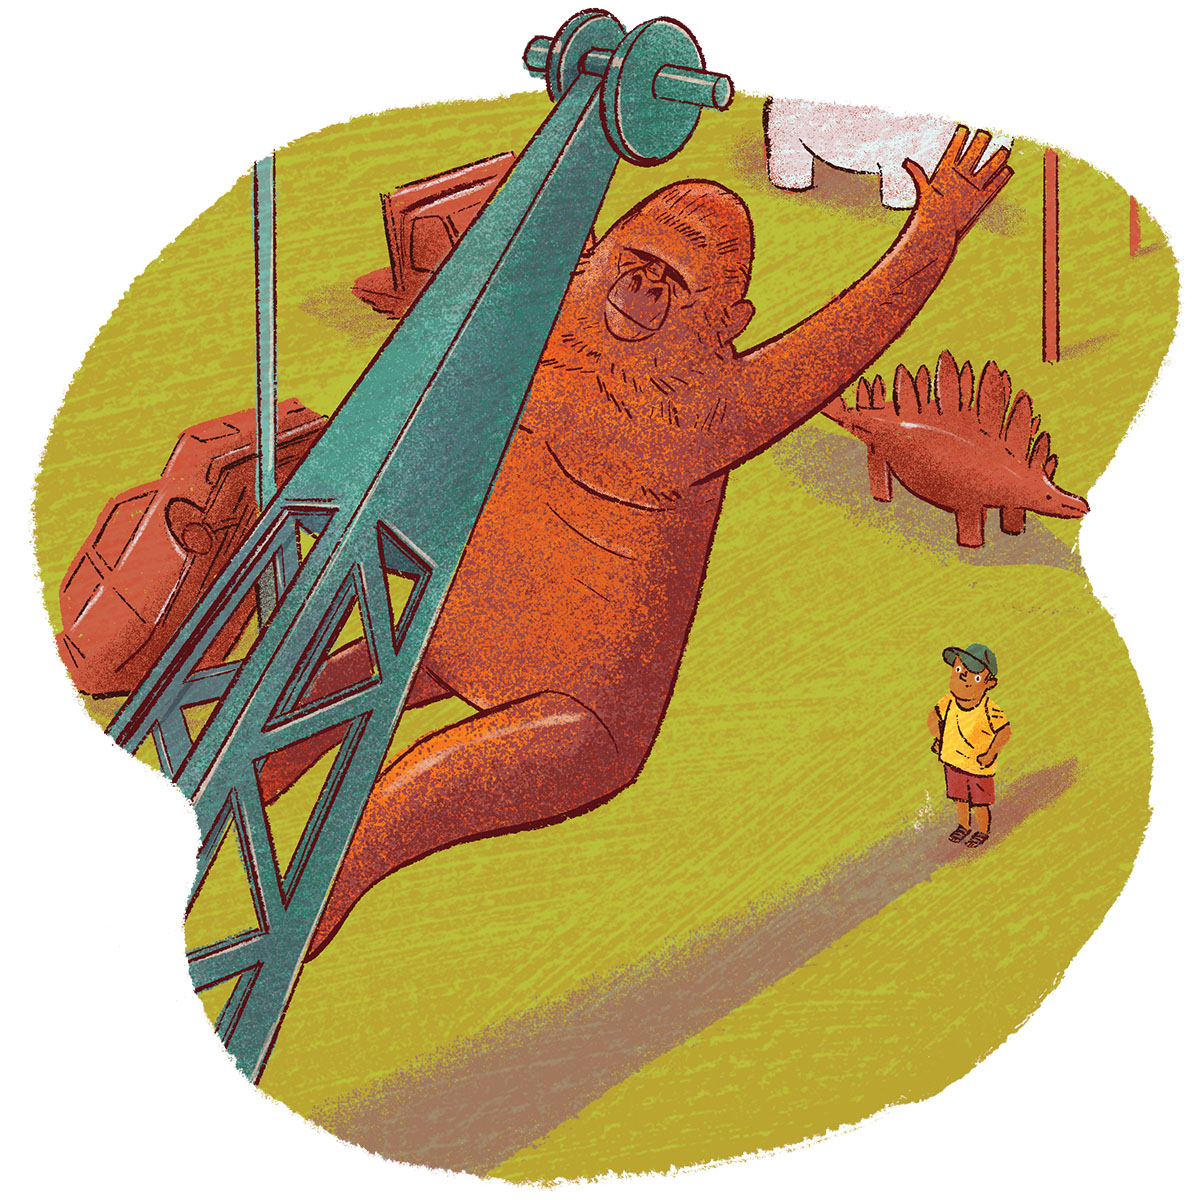 An illustration of a large rust-colored gorilla climbing a metal object